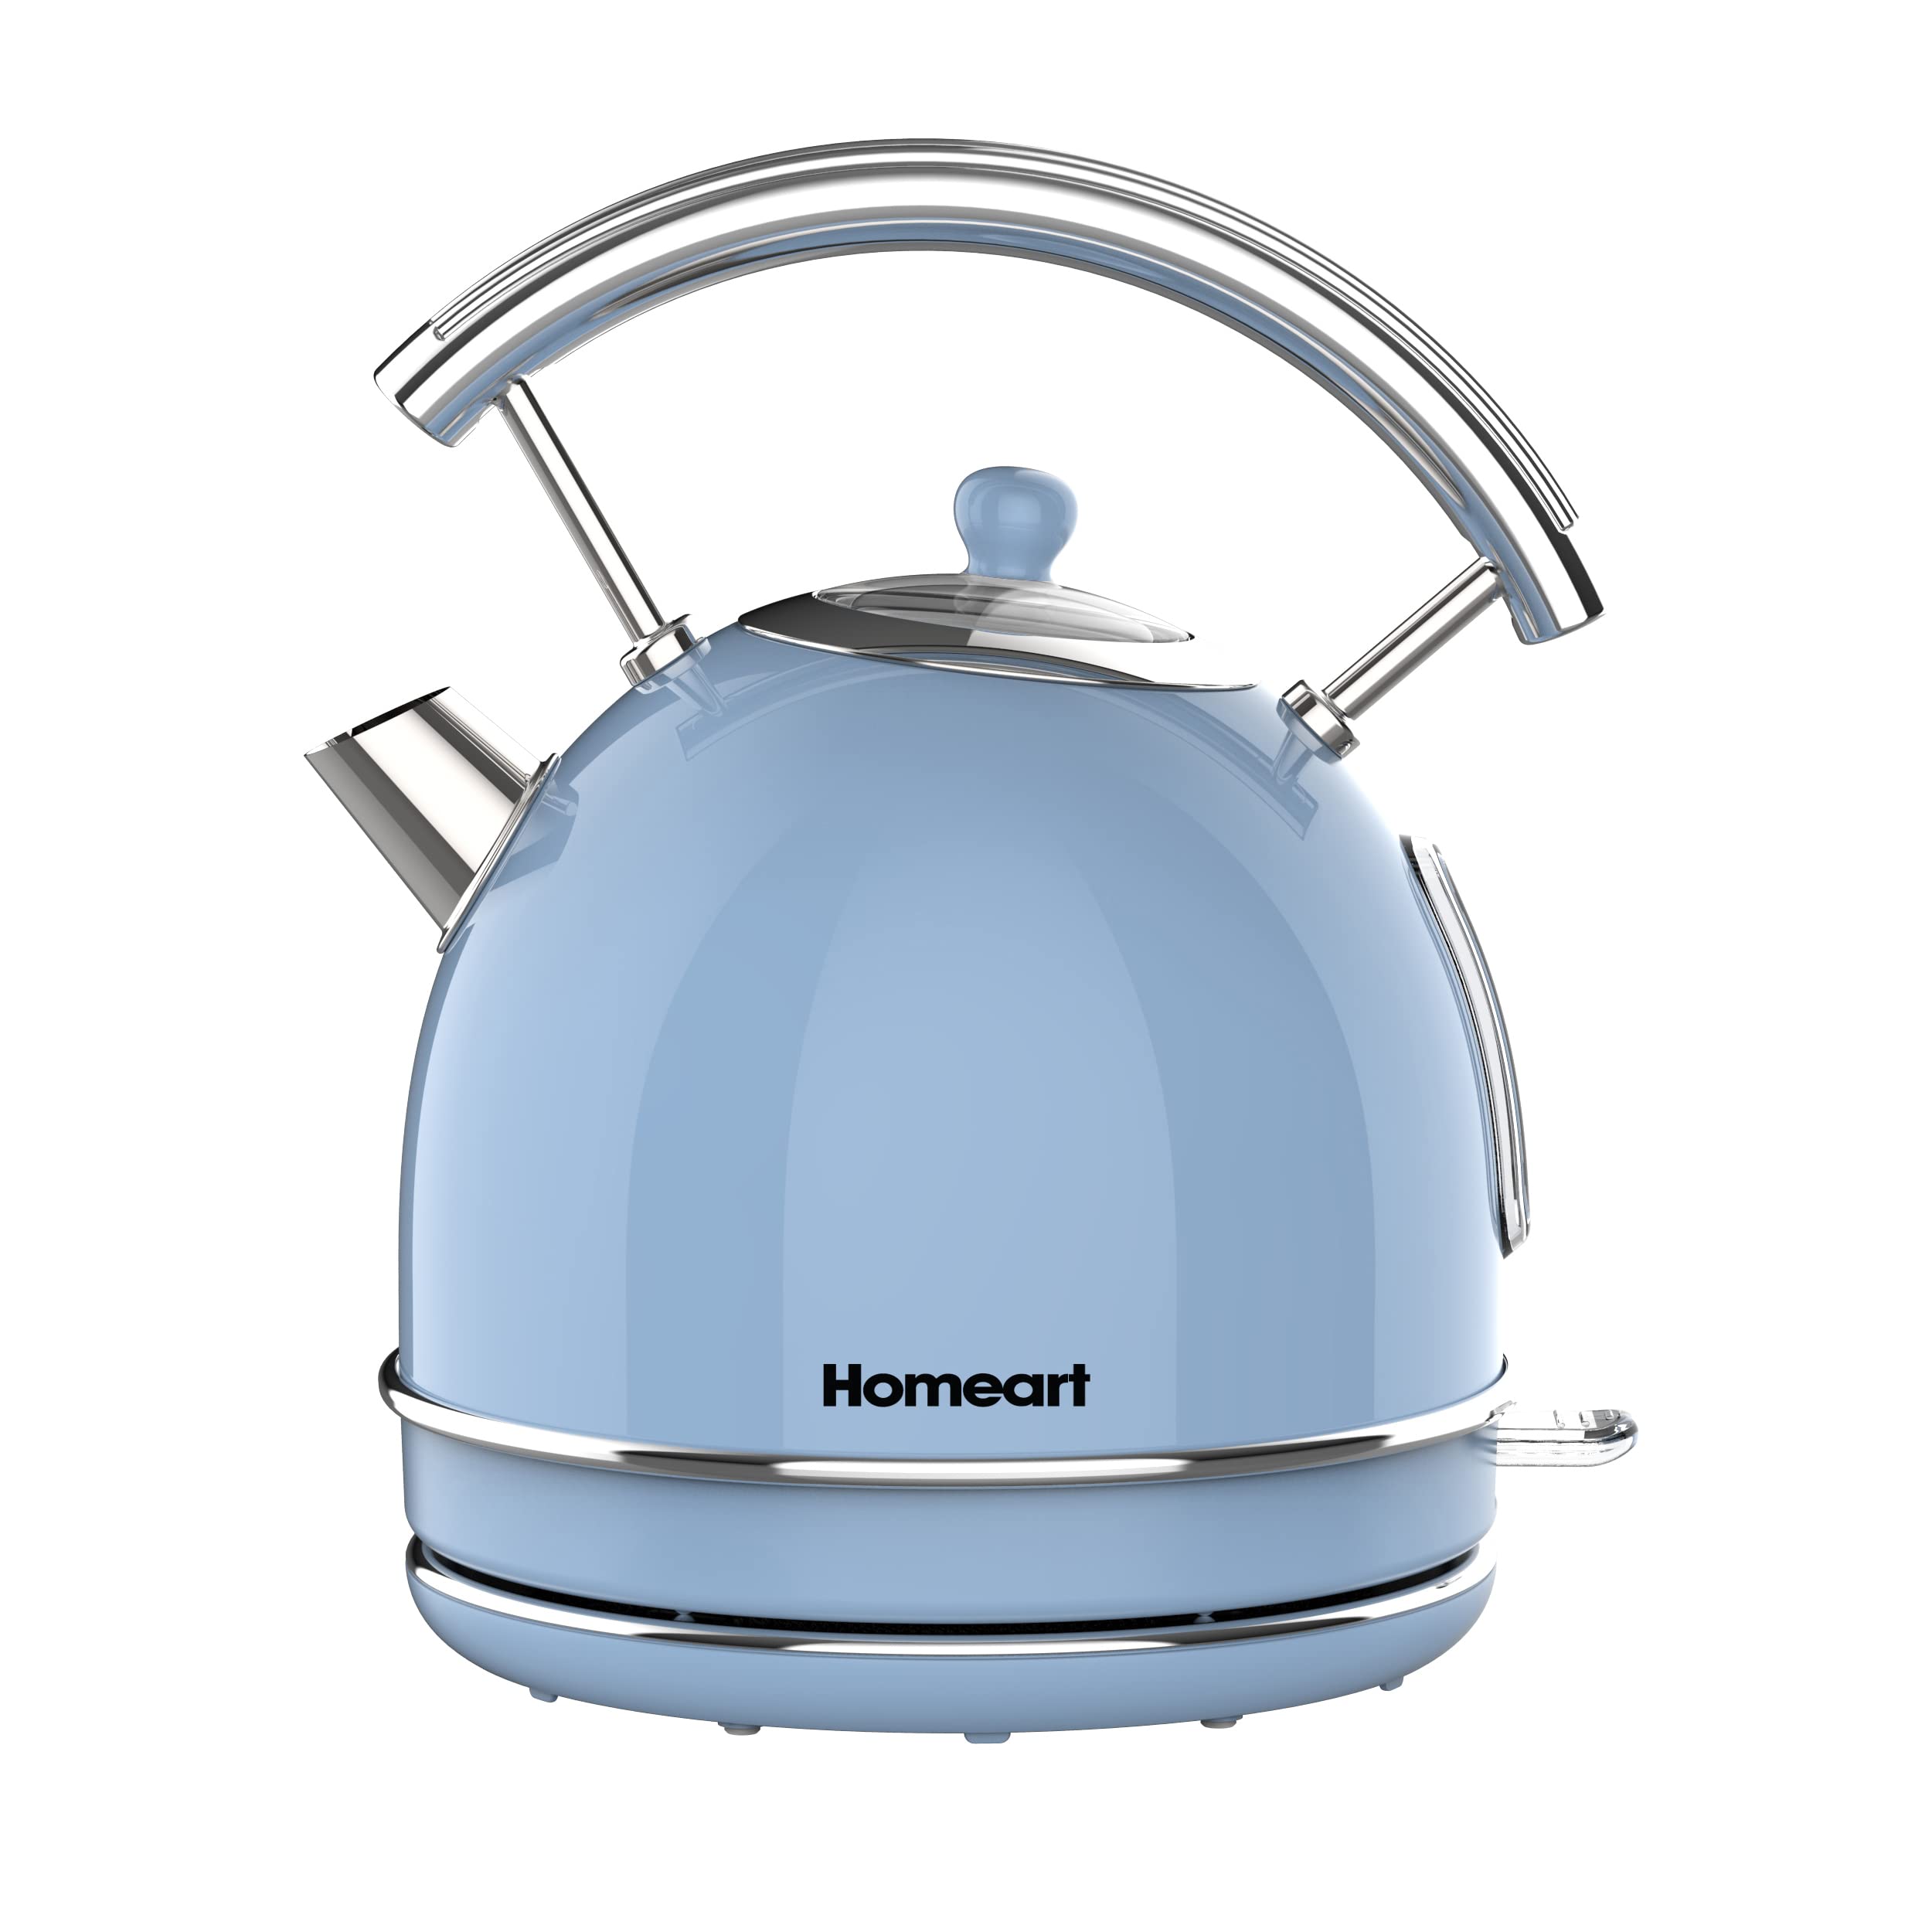 Homeart Alyssa Dome Retro Electric Cordless Kettle - Stainless Steel With Removable Filter, Fast Boiling and Auto Shut-off - 1.7L Capacity, Powder Blue